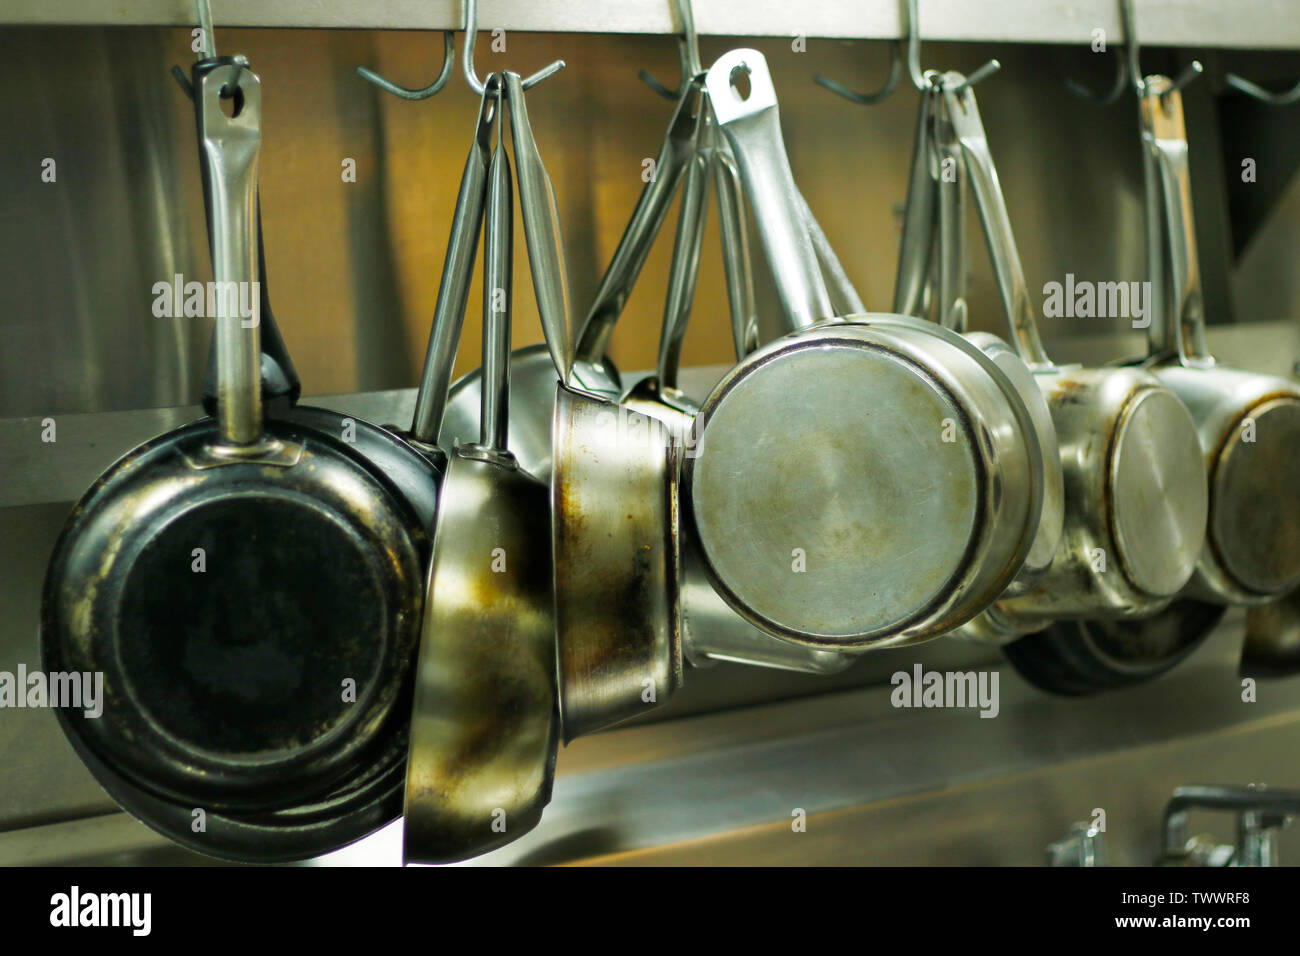 kitchen utensils, pans and pots hanging with hooks Stock Photo - Alamy